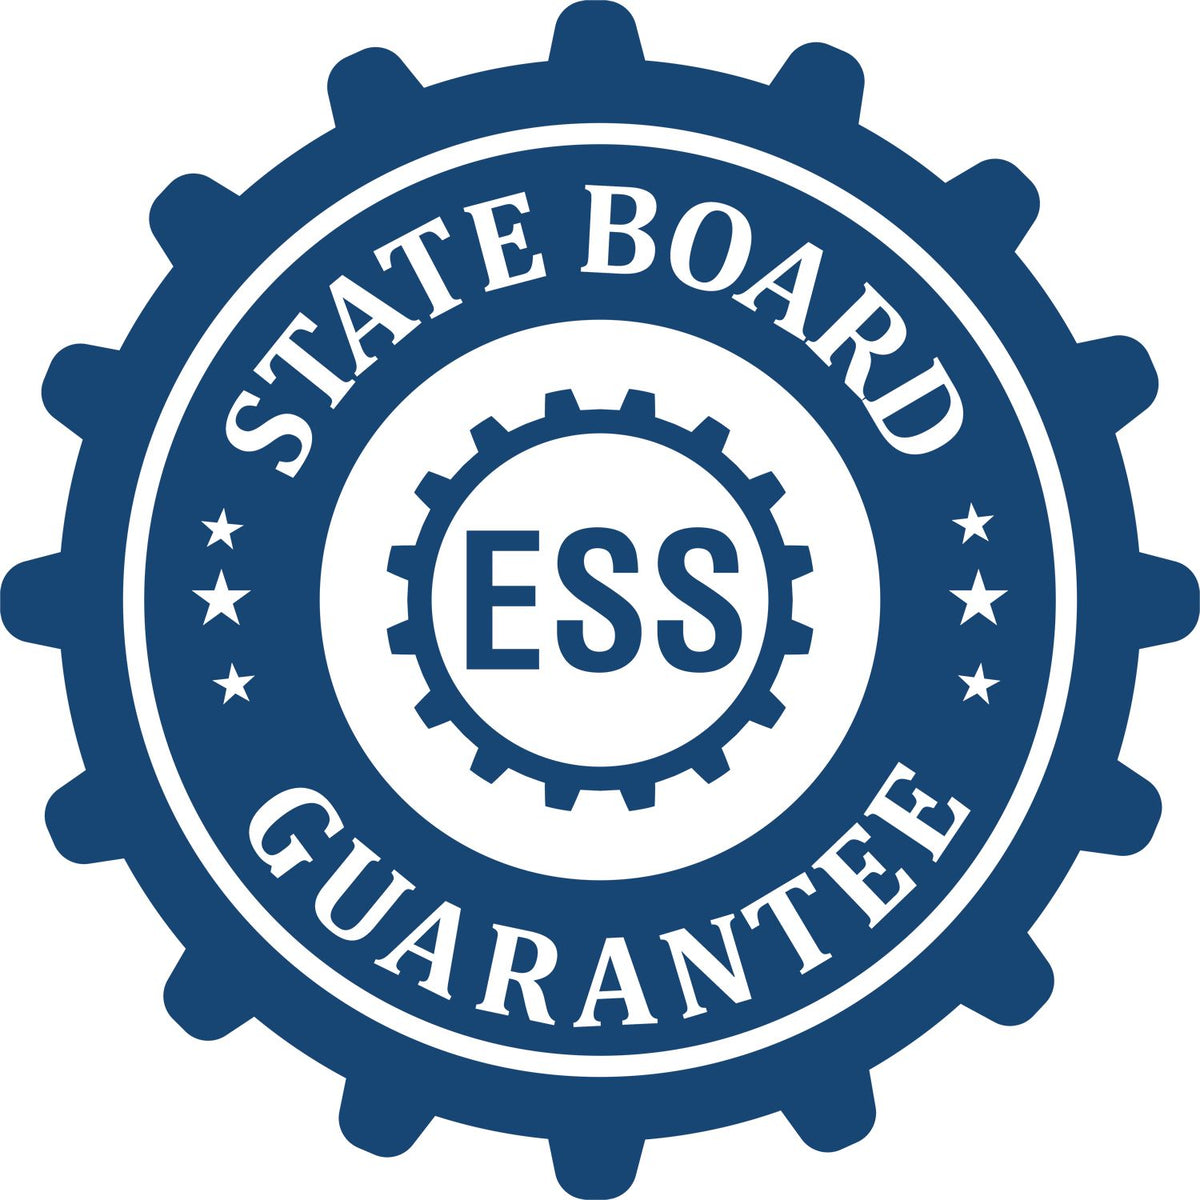 An emblem in a gear shape illustrating a state board guarantee for the State of New Jersey Extended Long Reach Engineer Seal product.